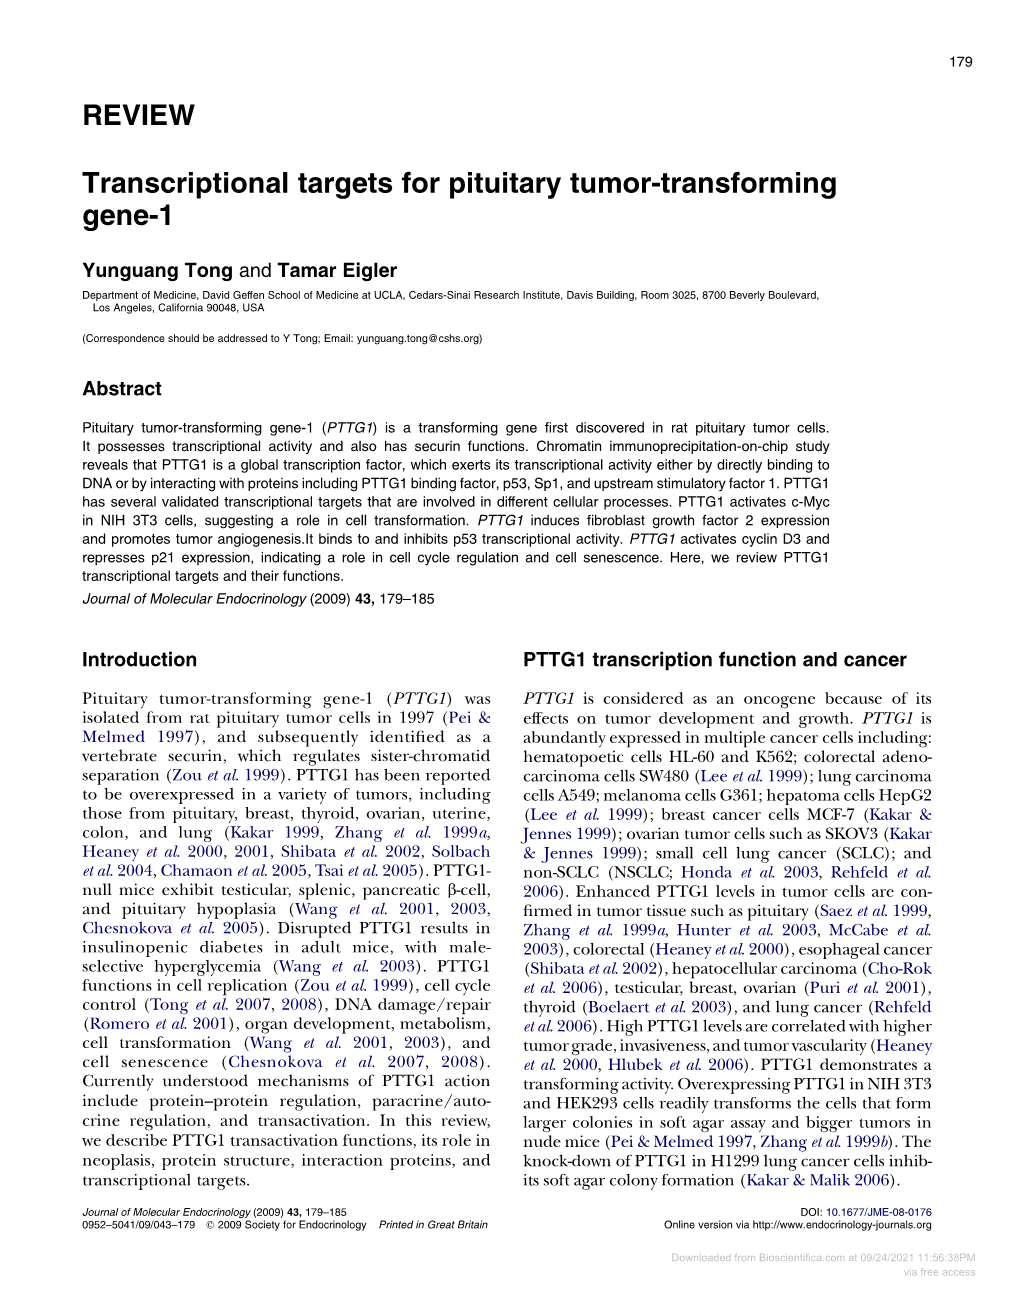 REVIEW Transcriptional Targets for Pituitary Tumor-Transforming Gene-1